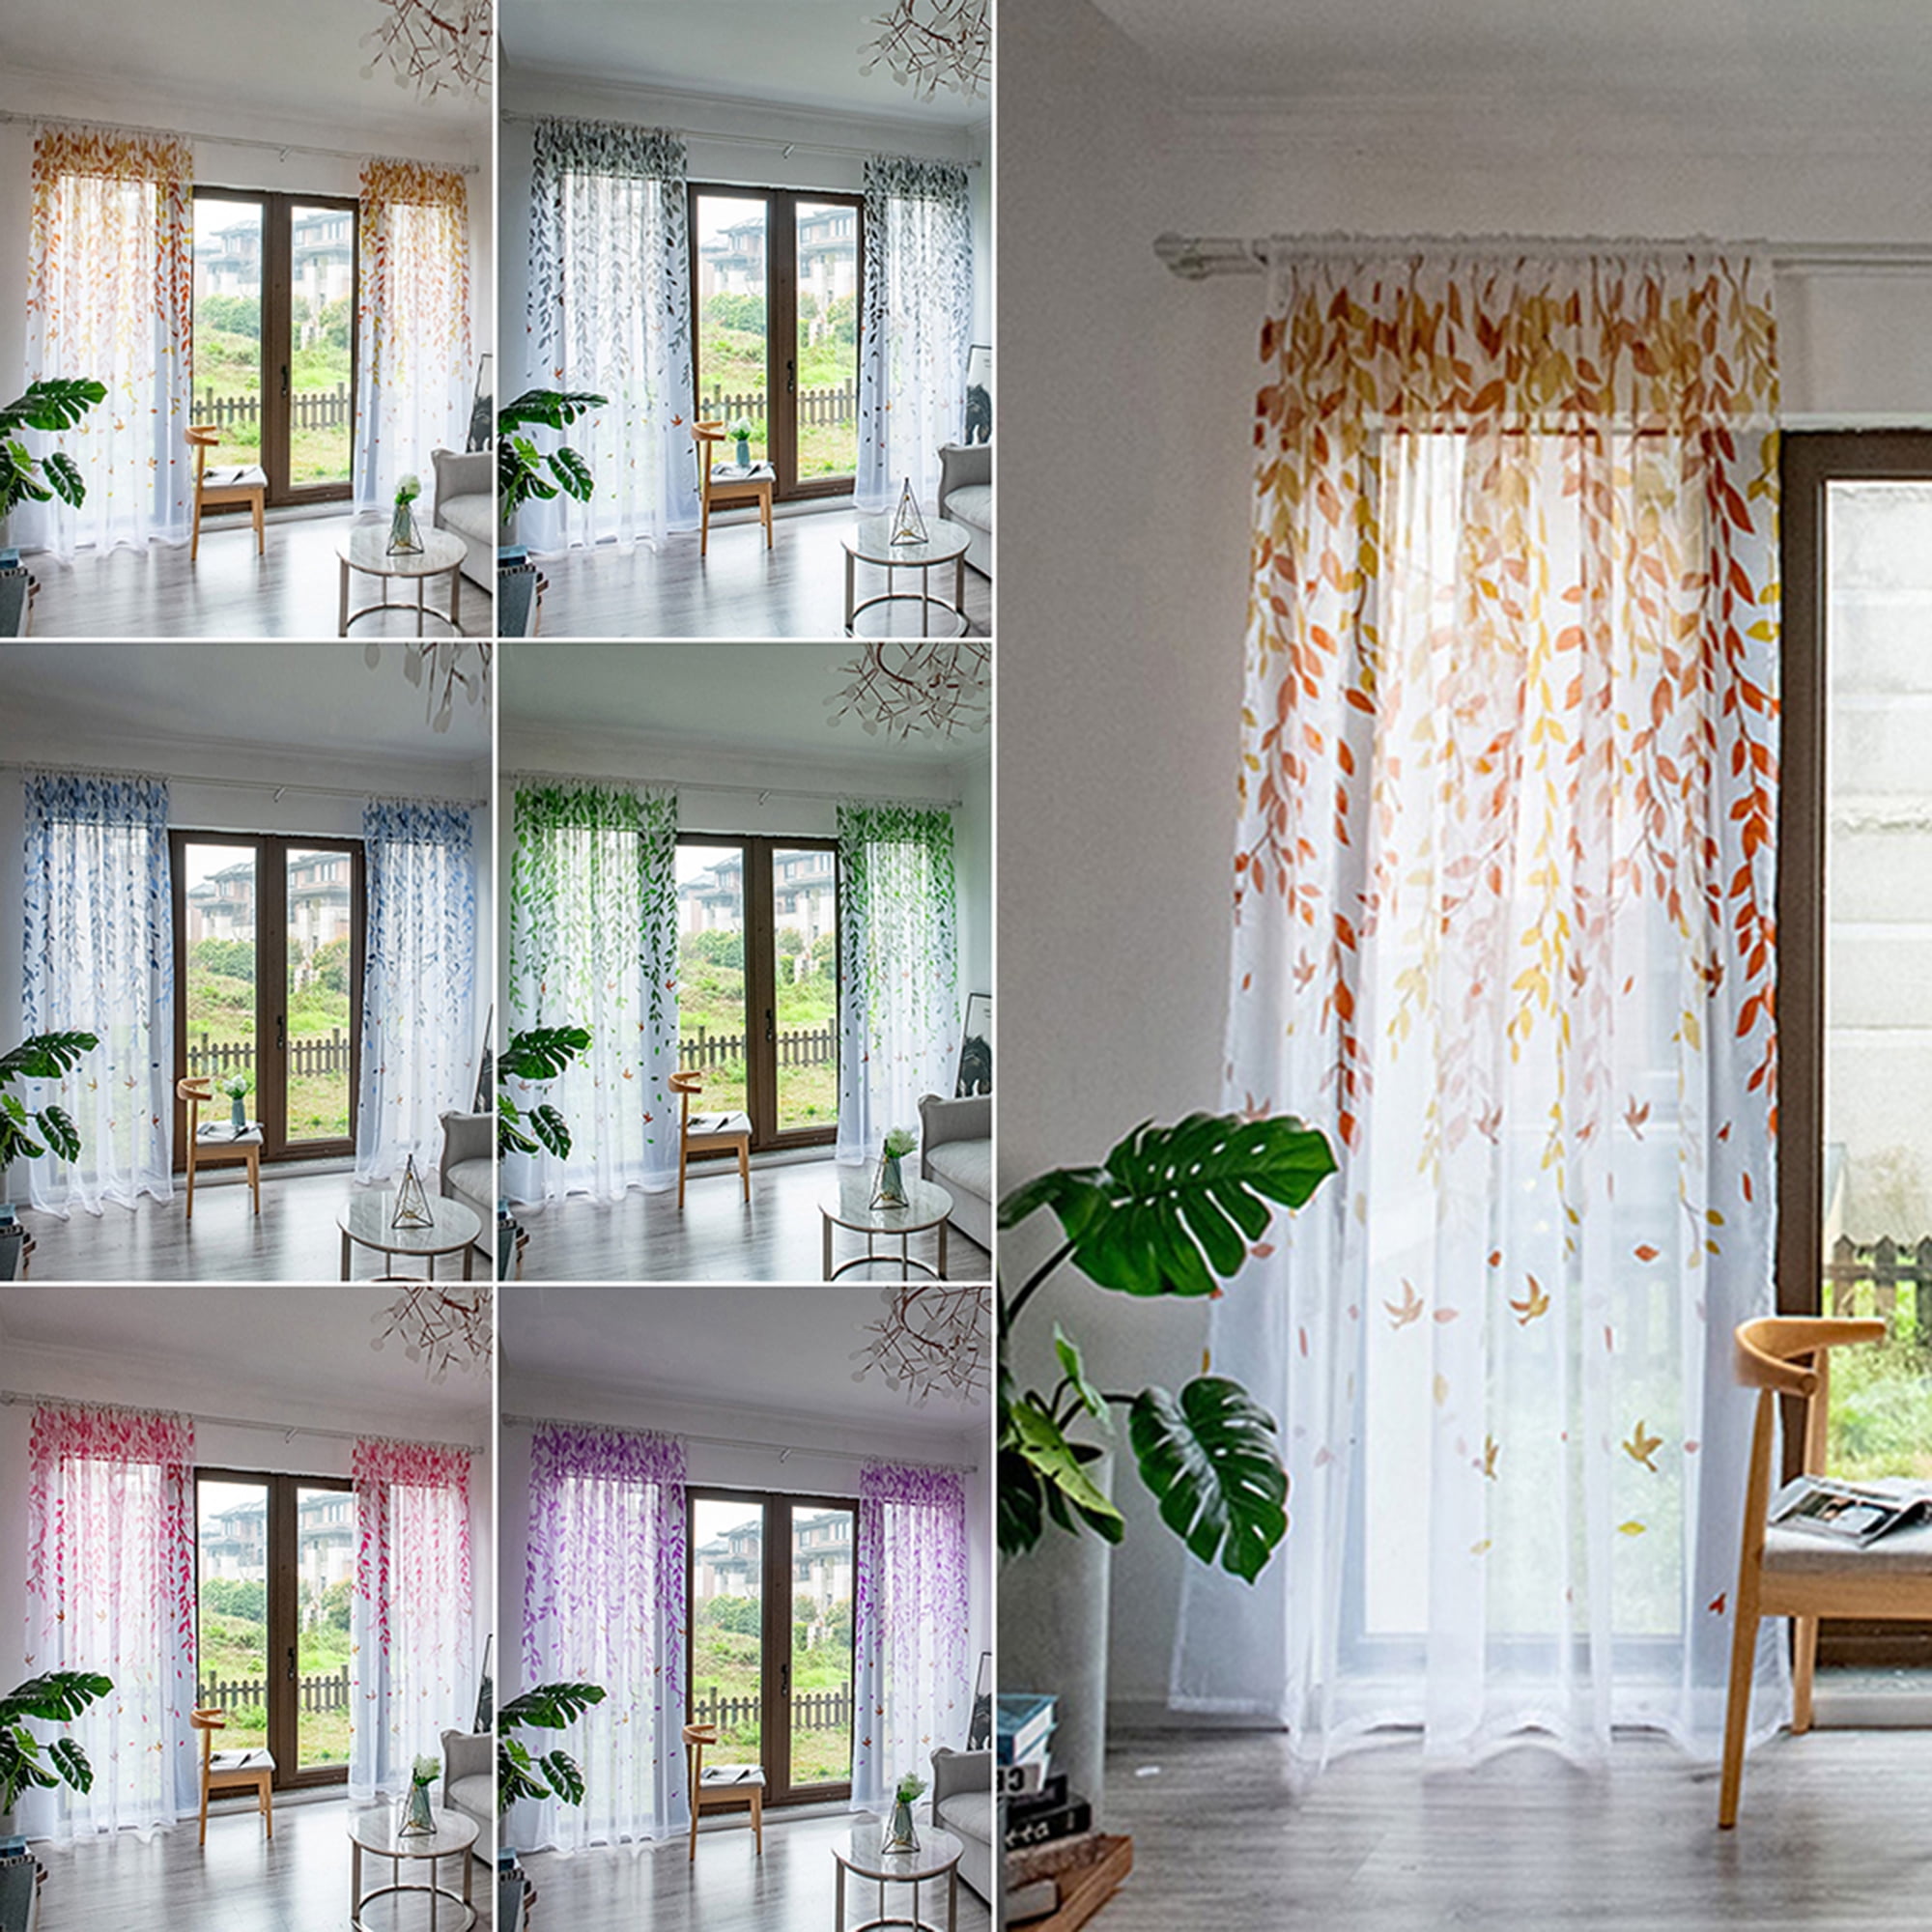 Home  Pastoral Floral Tulle Voile Drape Panel Sheer Scarf Valance Window Curtain 